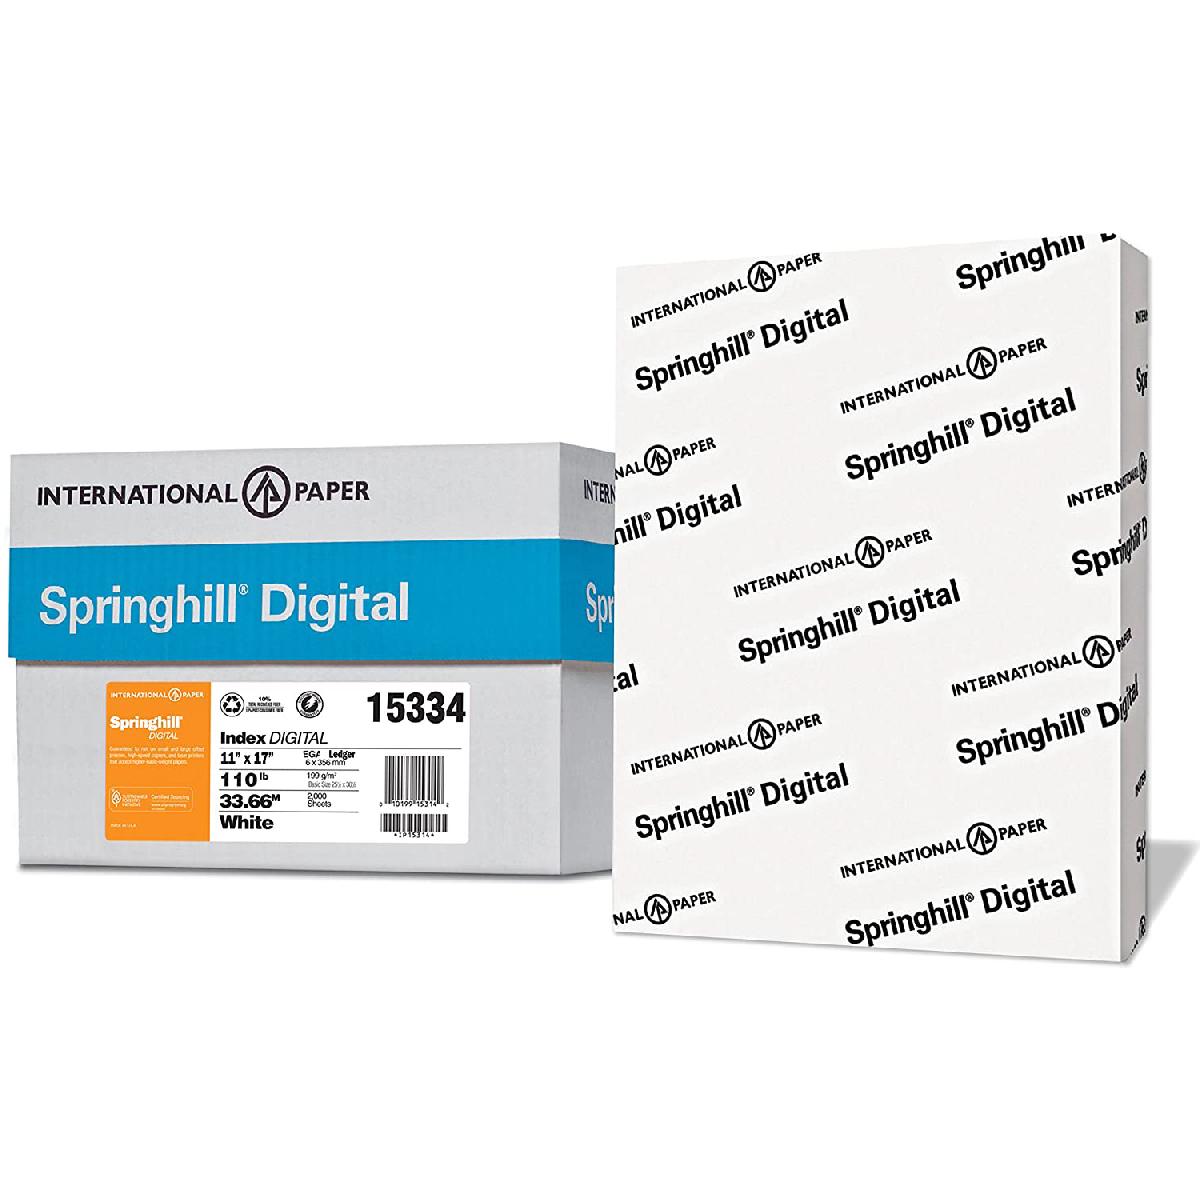 Springhill® Index Digital White 110 lb. Card Stock 8.5x11 in. 250